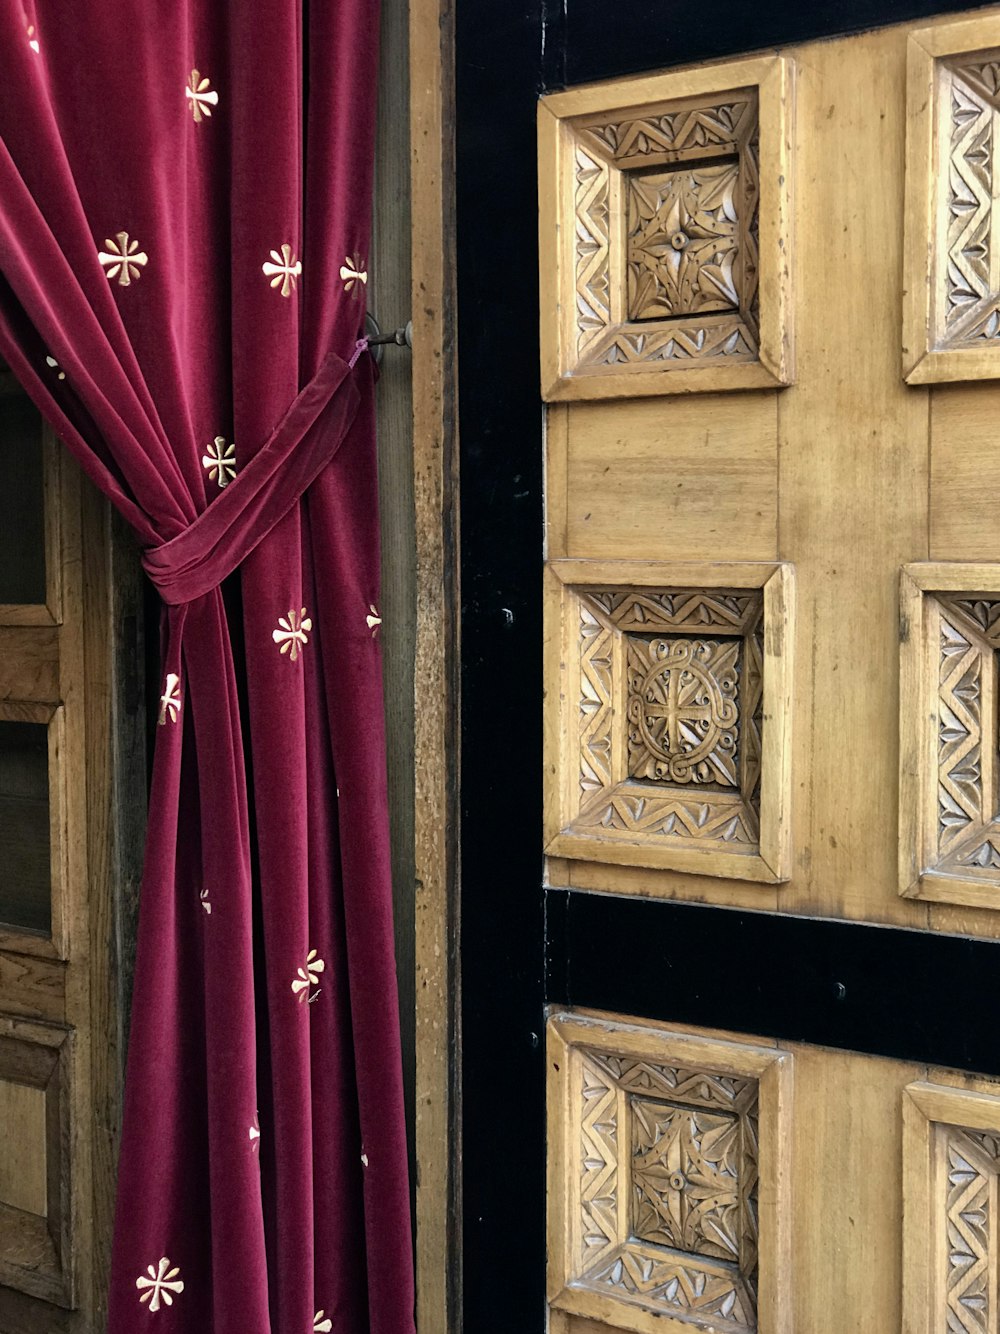 a close up of a curtain with a wooden door in the background